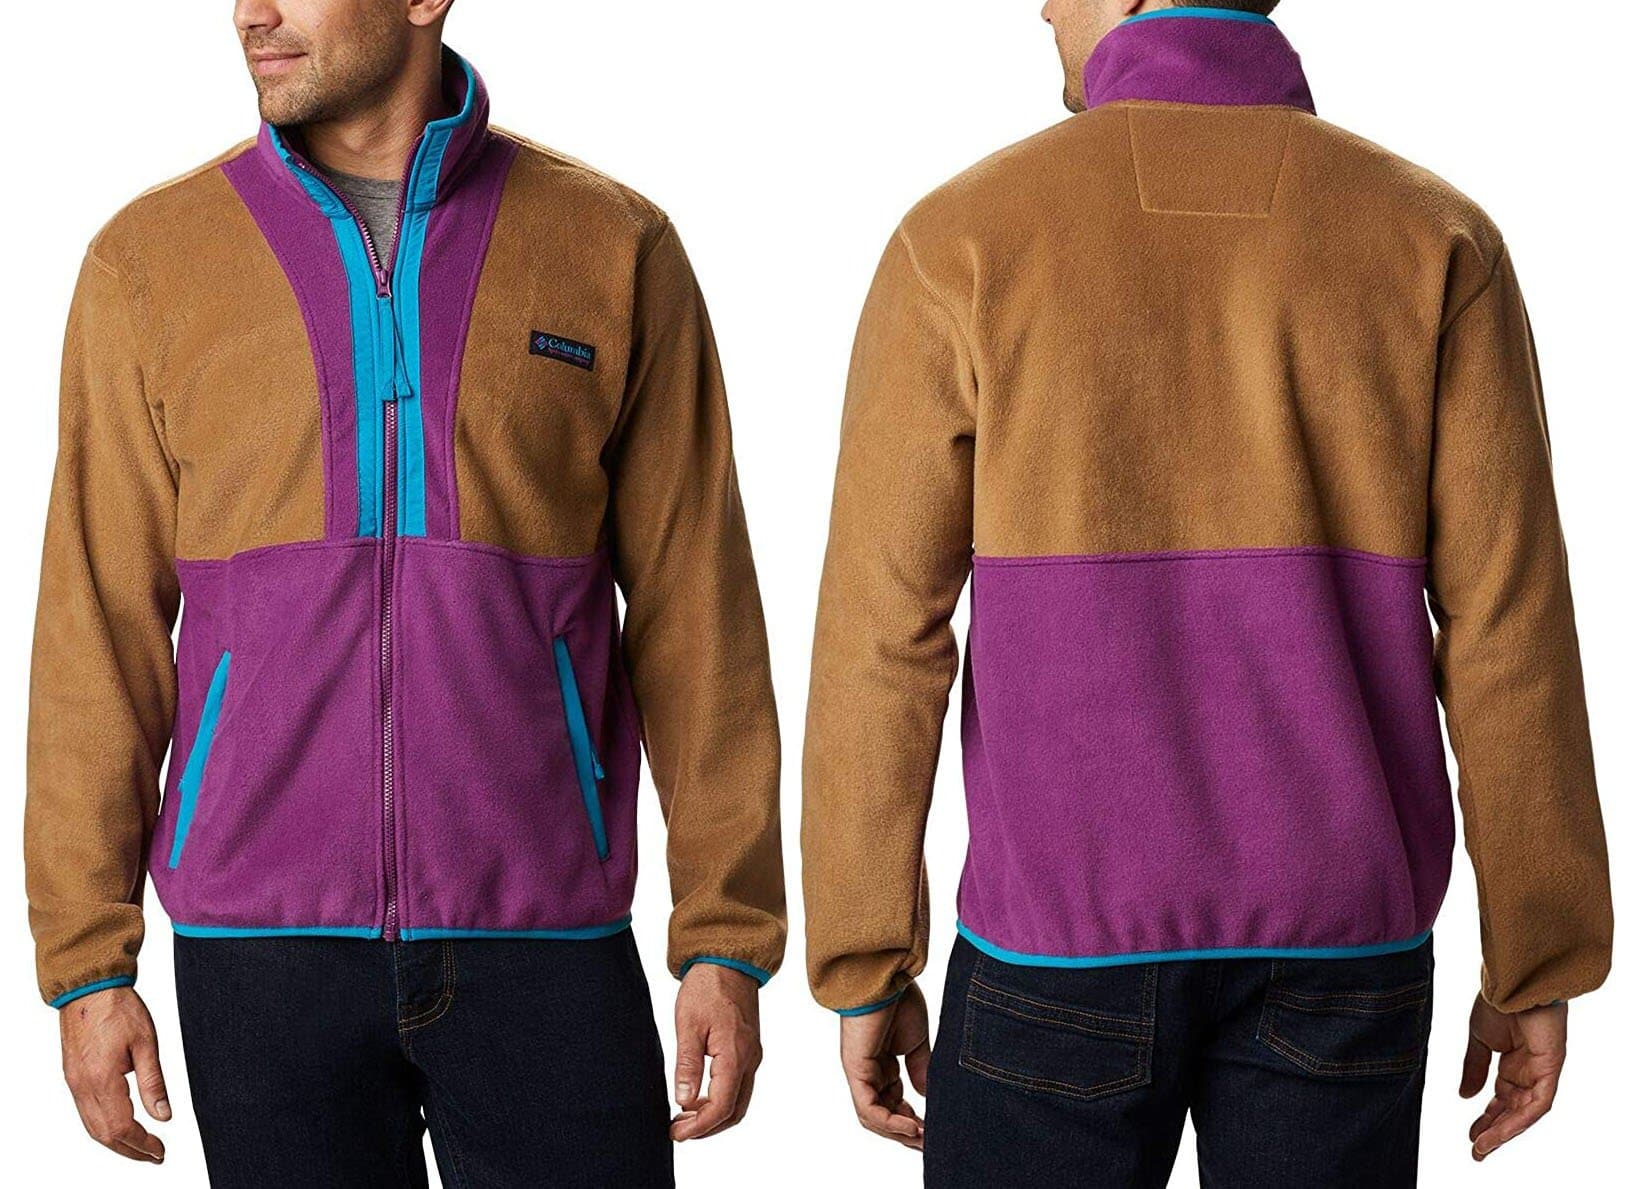 The Columbia Back Bowl fleece jacket features '90s-inspired color-blocking